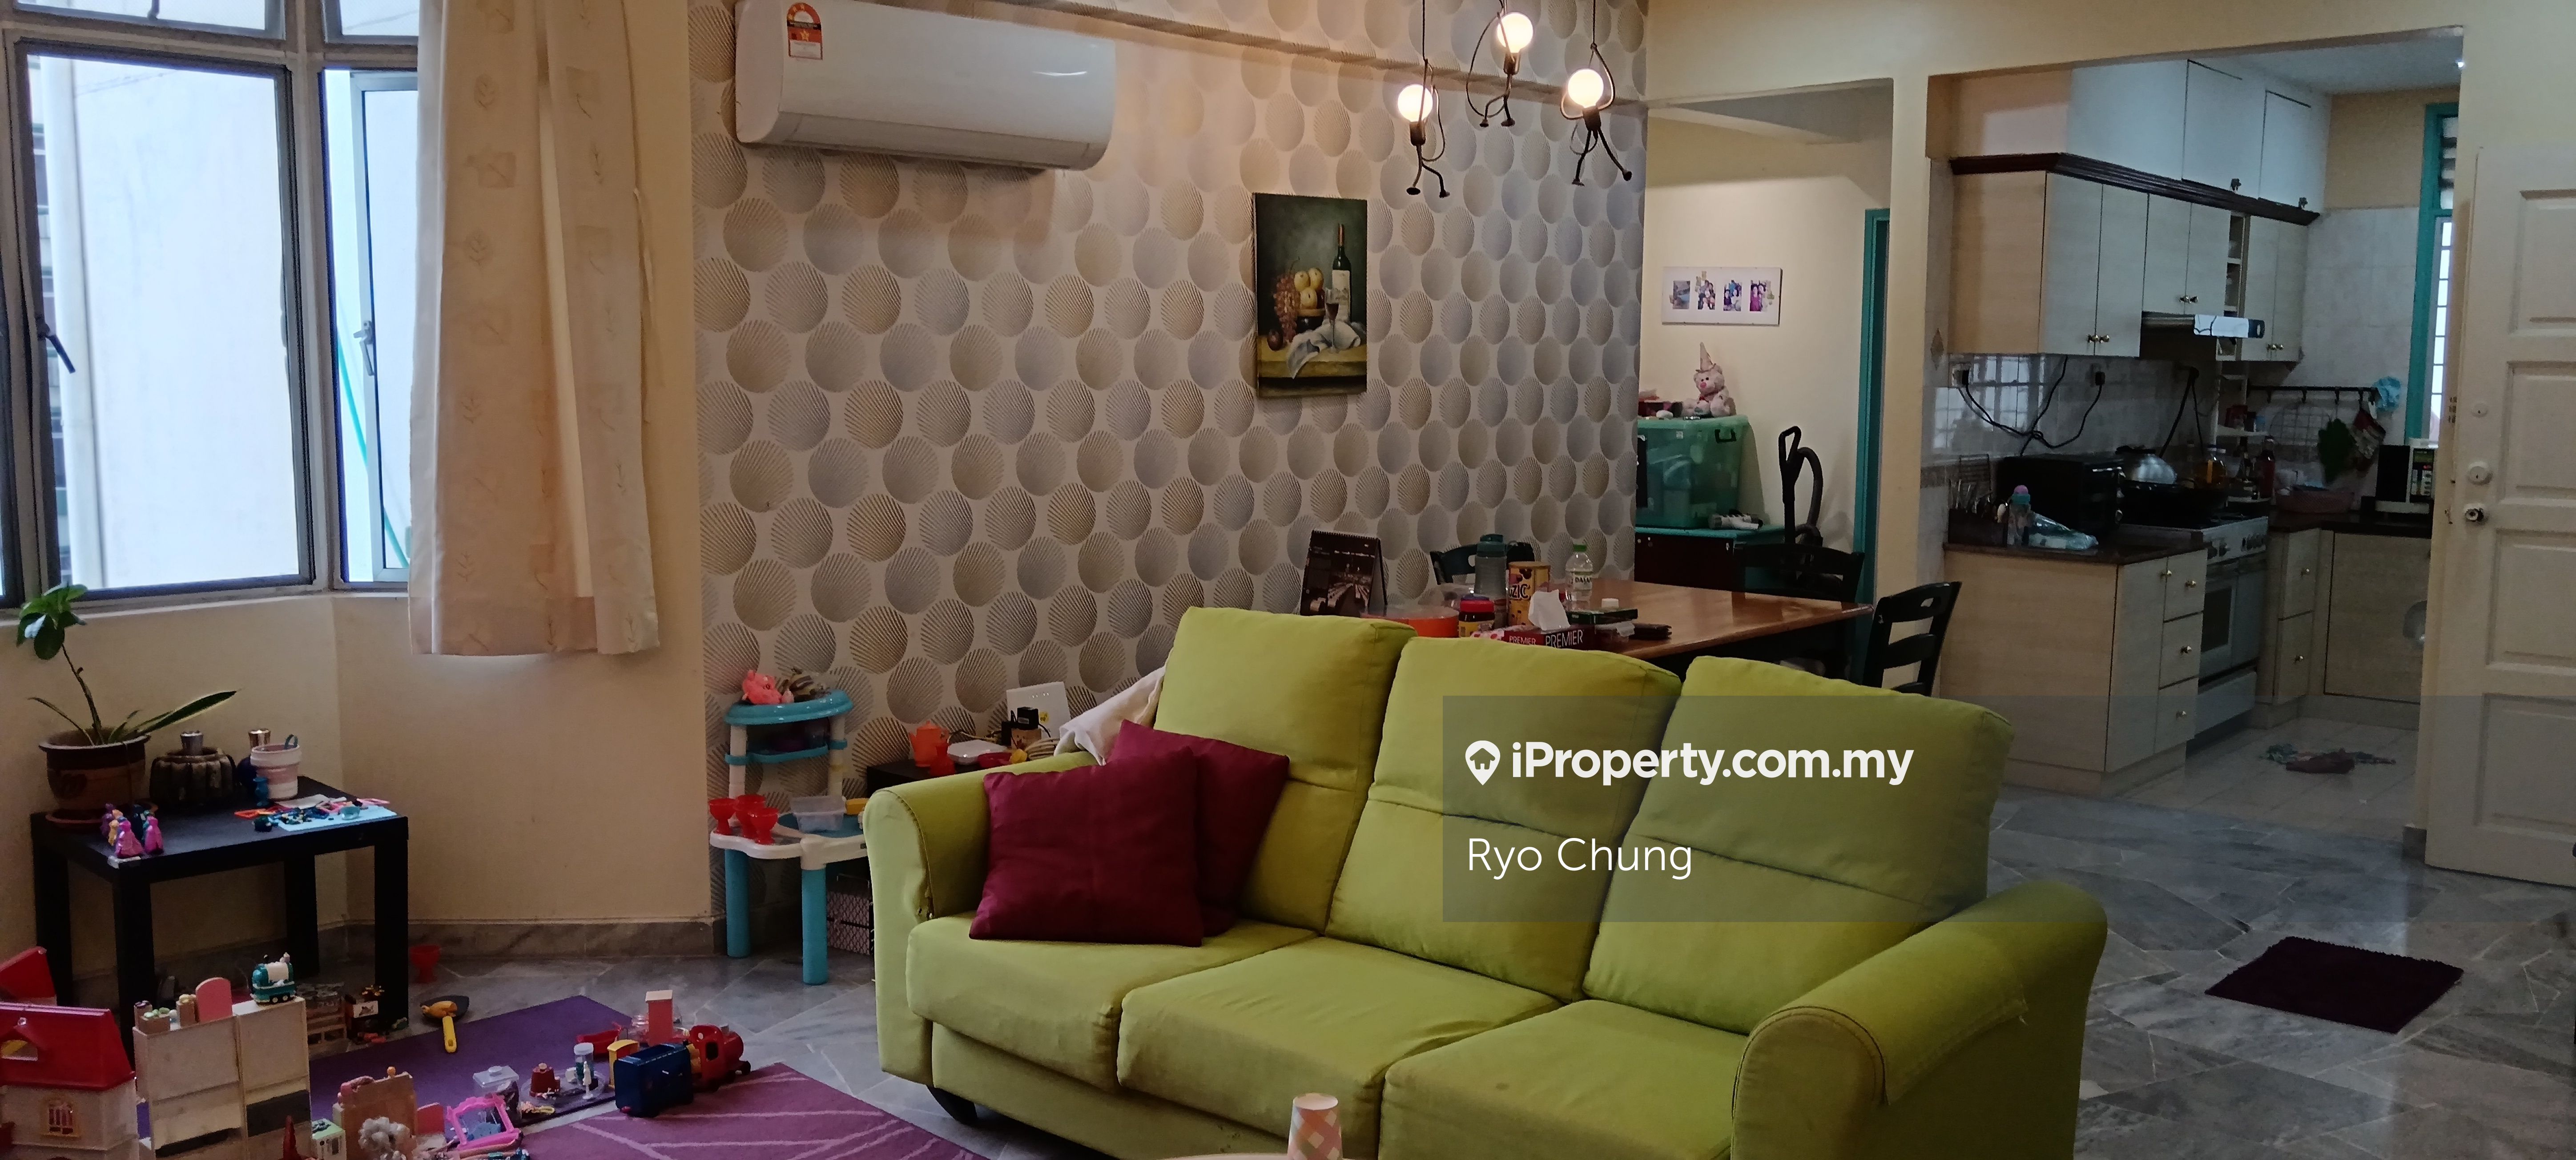 Freehold Spacious Apartment for Rent! Walking distance to LRT.